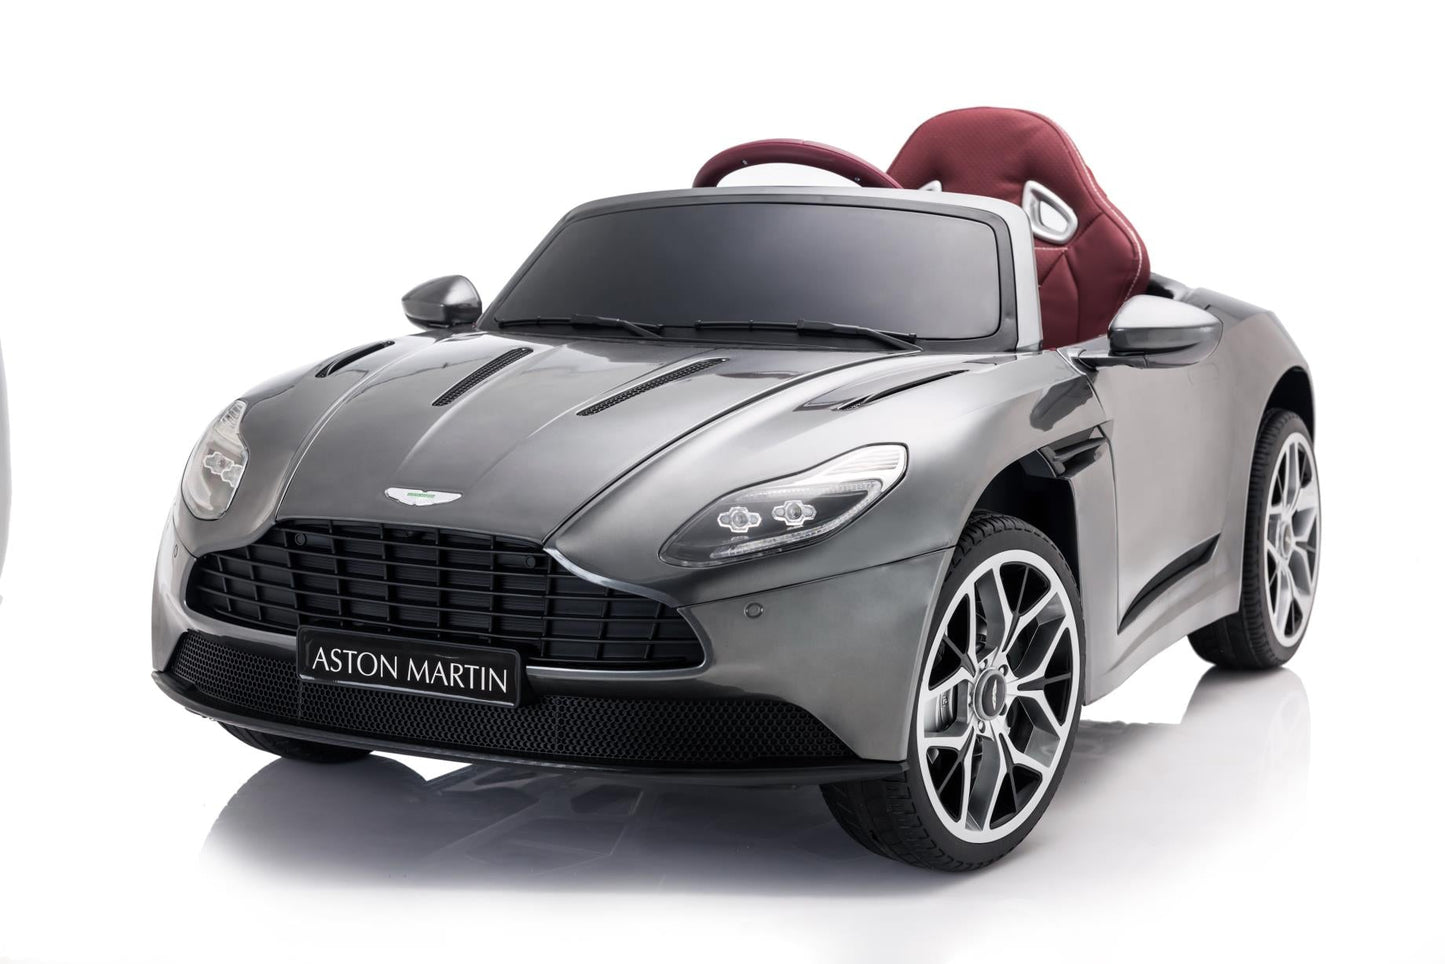 Grey Aston Martin DB11 Electric Ride On Car for kids on a white background.